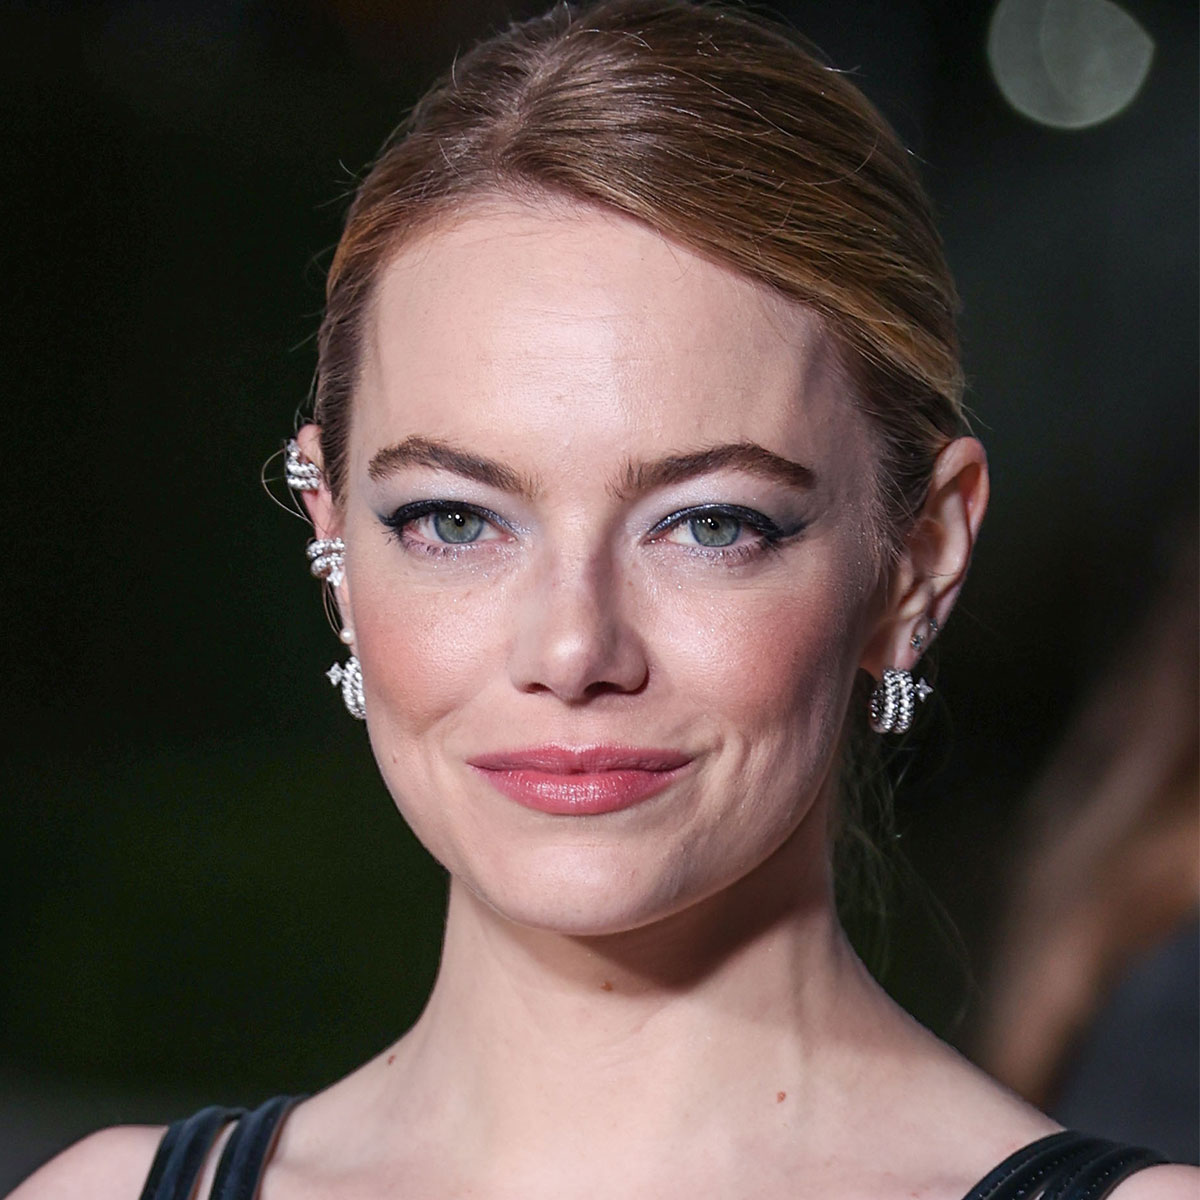 Emma Stone has described her character in Poor Things as her